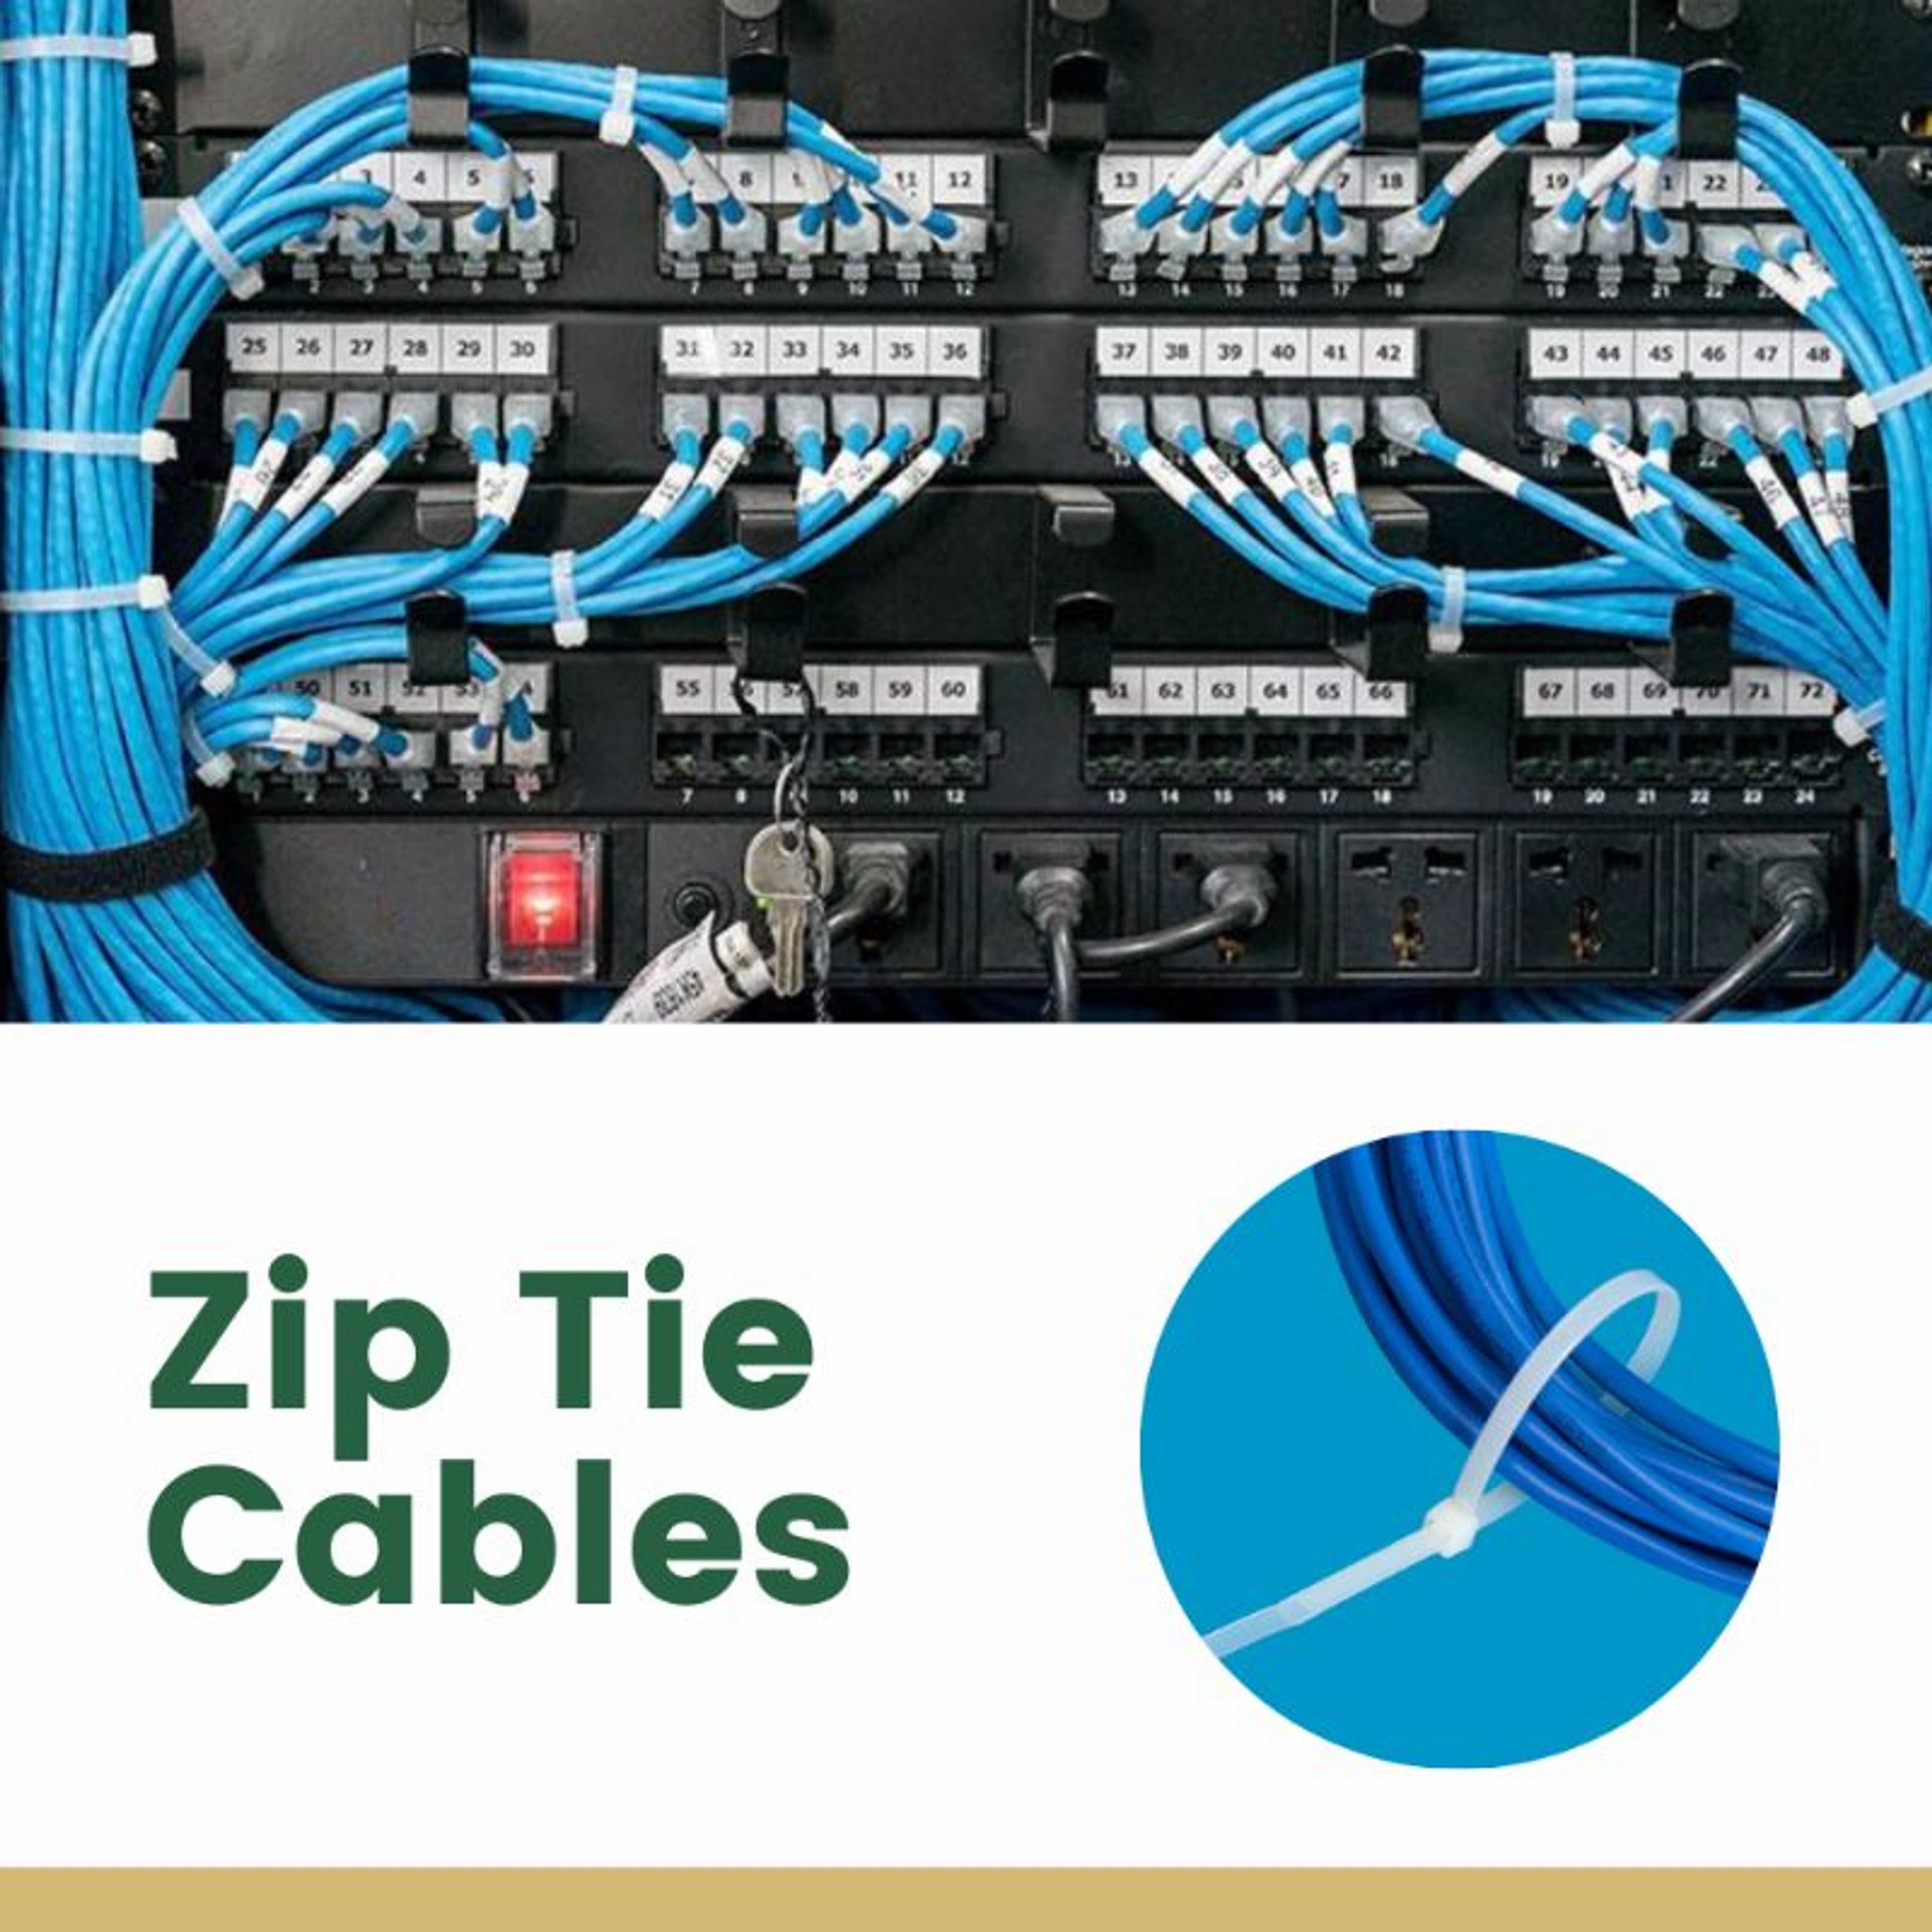 Behind My Computer Nylon Self-Locking Zip Ties Cable Organizer  Wall Mount (Cable Management) ideas | cable management, cable organizer RackSolutions Zip Tie vs Hook-and-Loop: Which is Better for Cable Management